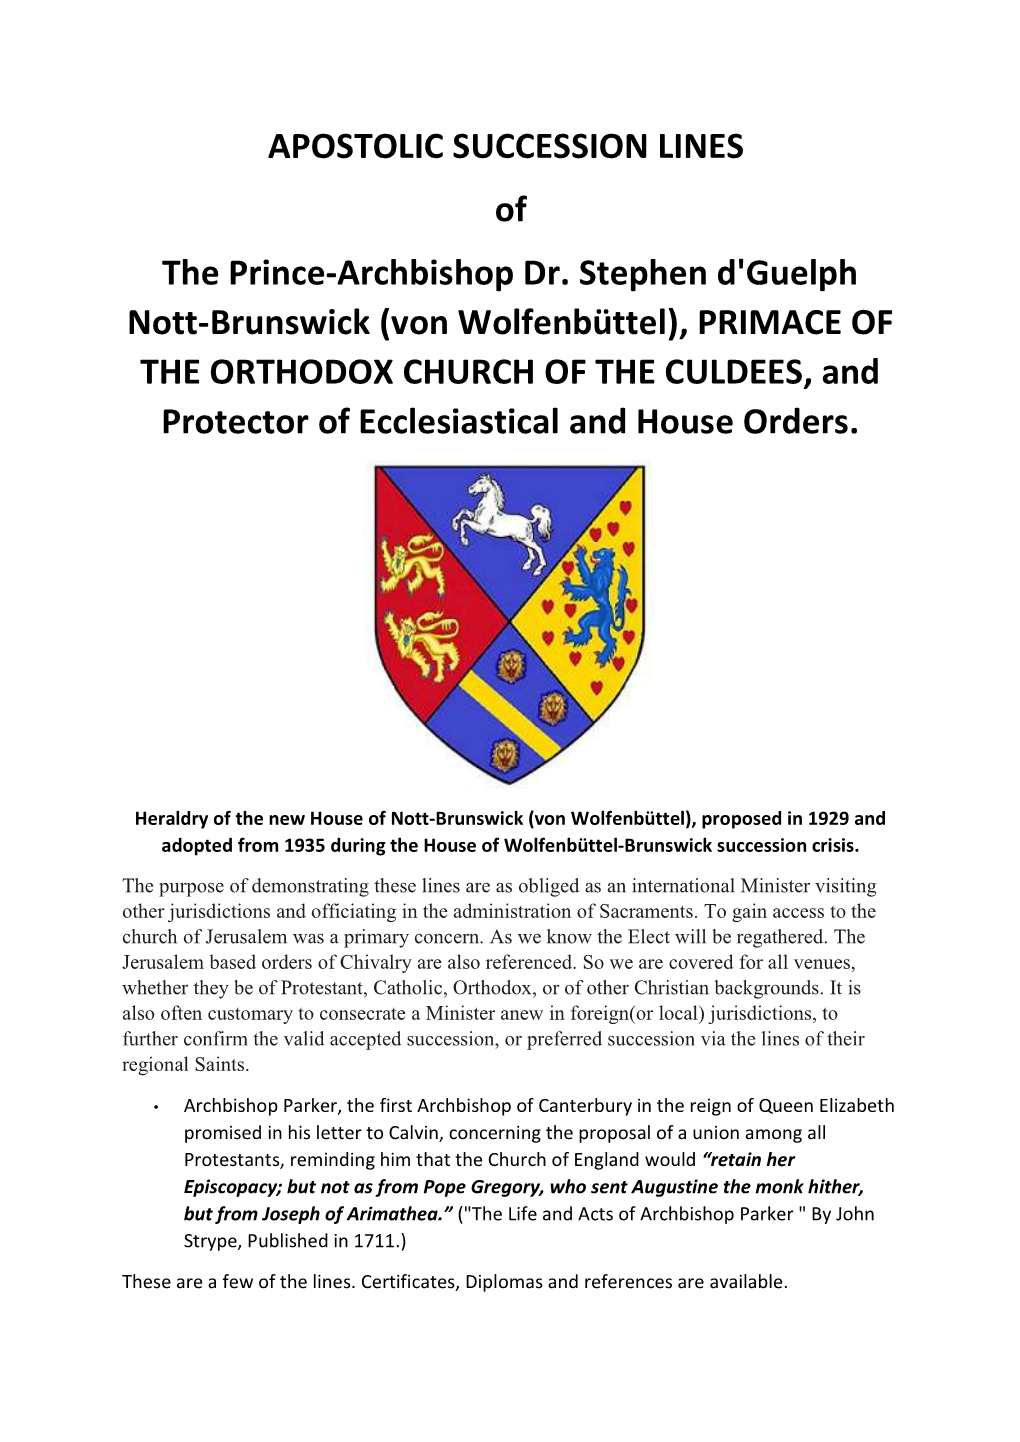 APOSTOLIC SUCCESSION LINES of the Prince-Archbishop Dr. Stephen